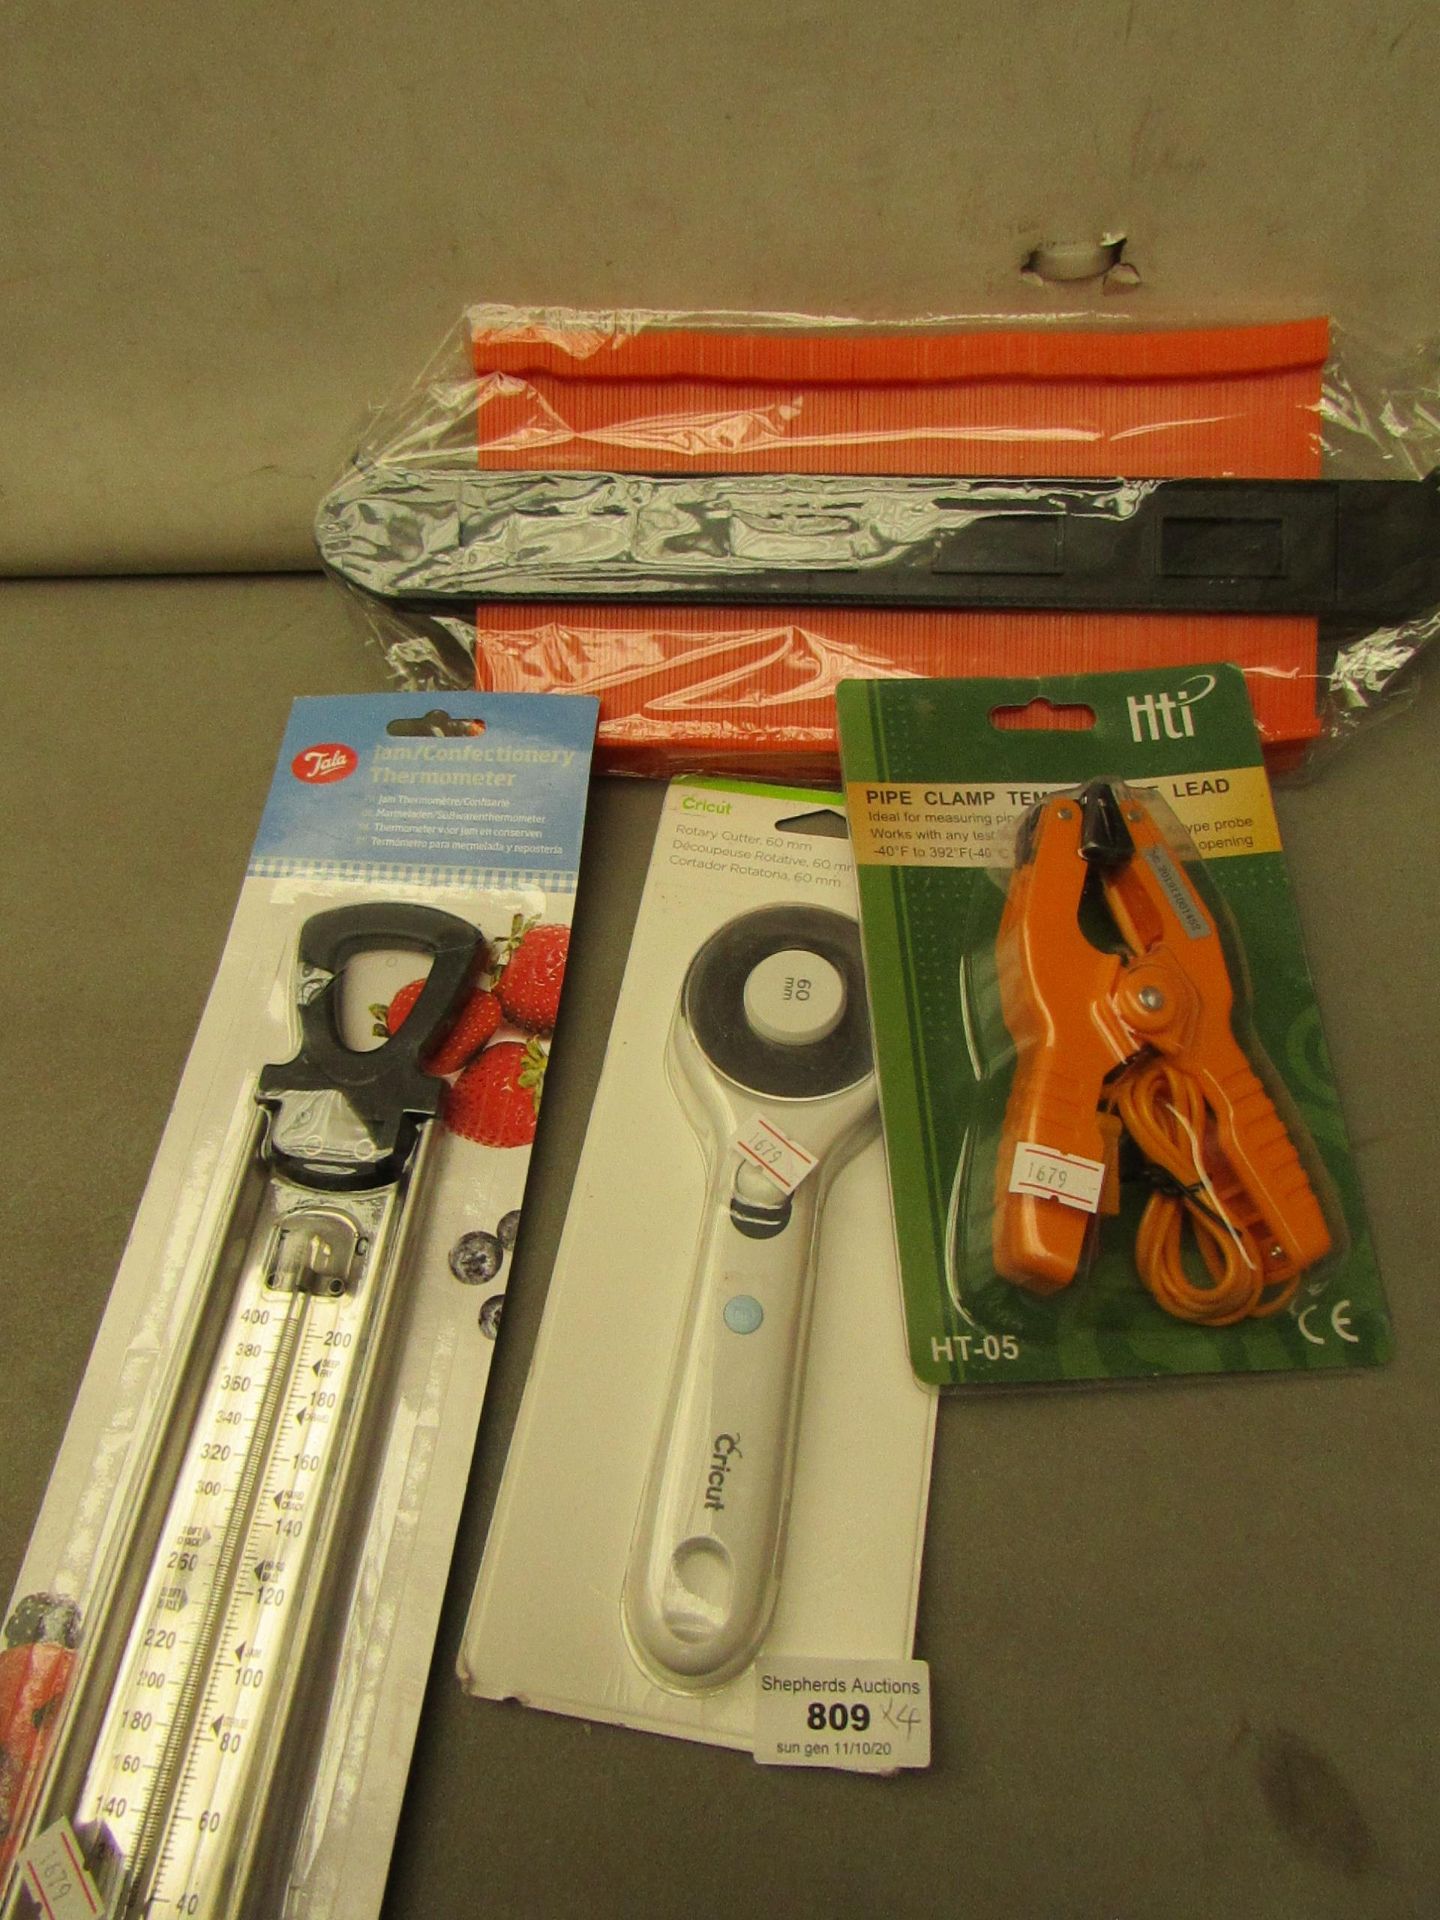 4 Items Being a 60mm Rotary Cutter, Thermometer,Pipe clamp temp lead